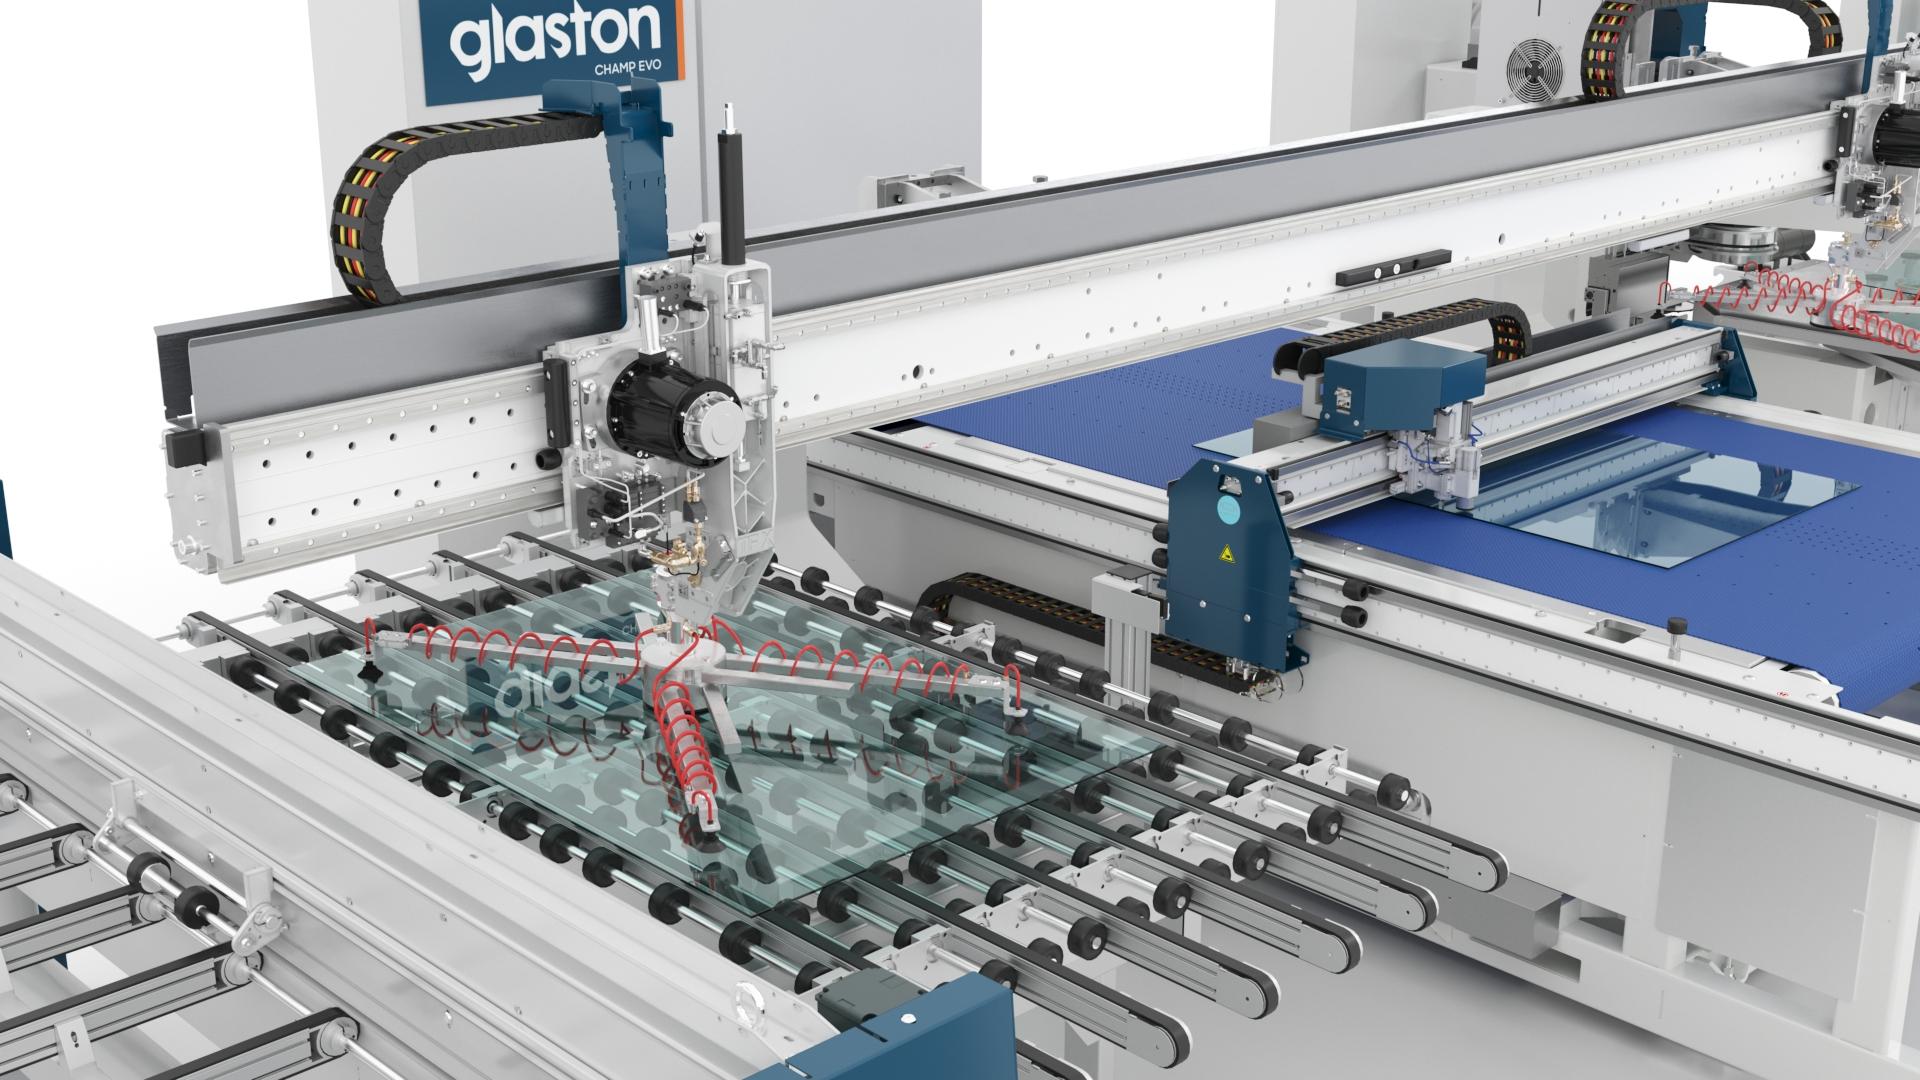 Glaston CHAMP EVO represents the latest evolution in the CHAMP automotive glass pre-processing line. The newest CHAMP EVO generation includes high-precision features in a grinding machine.